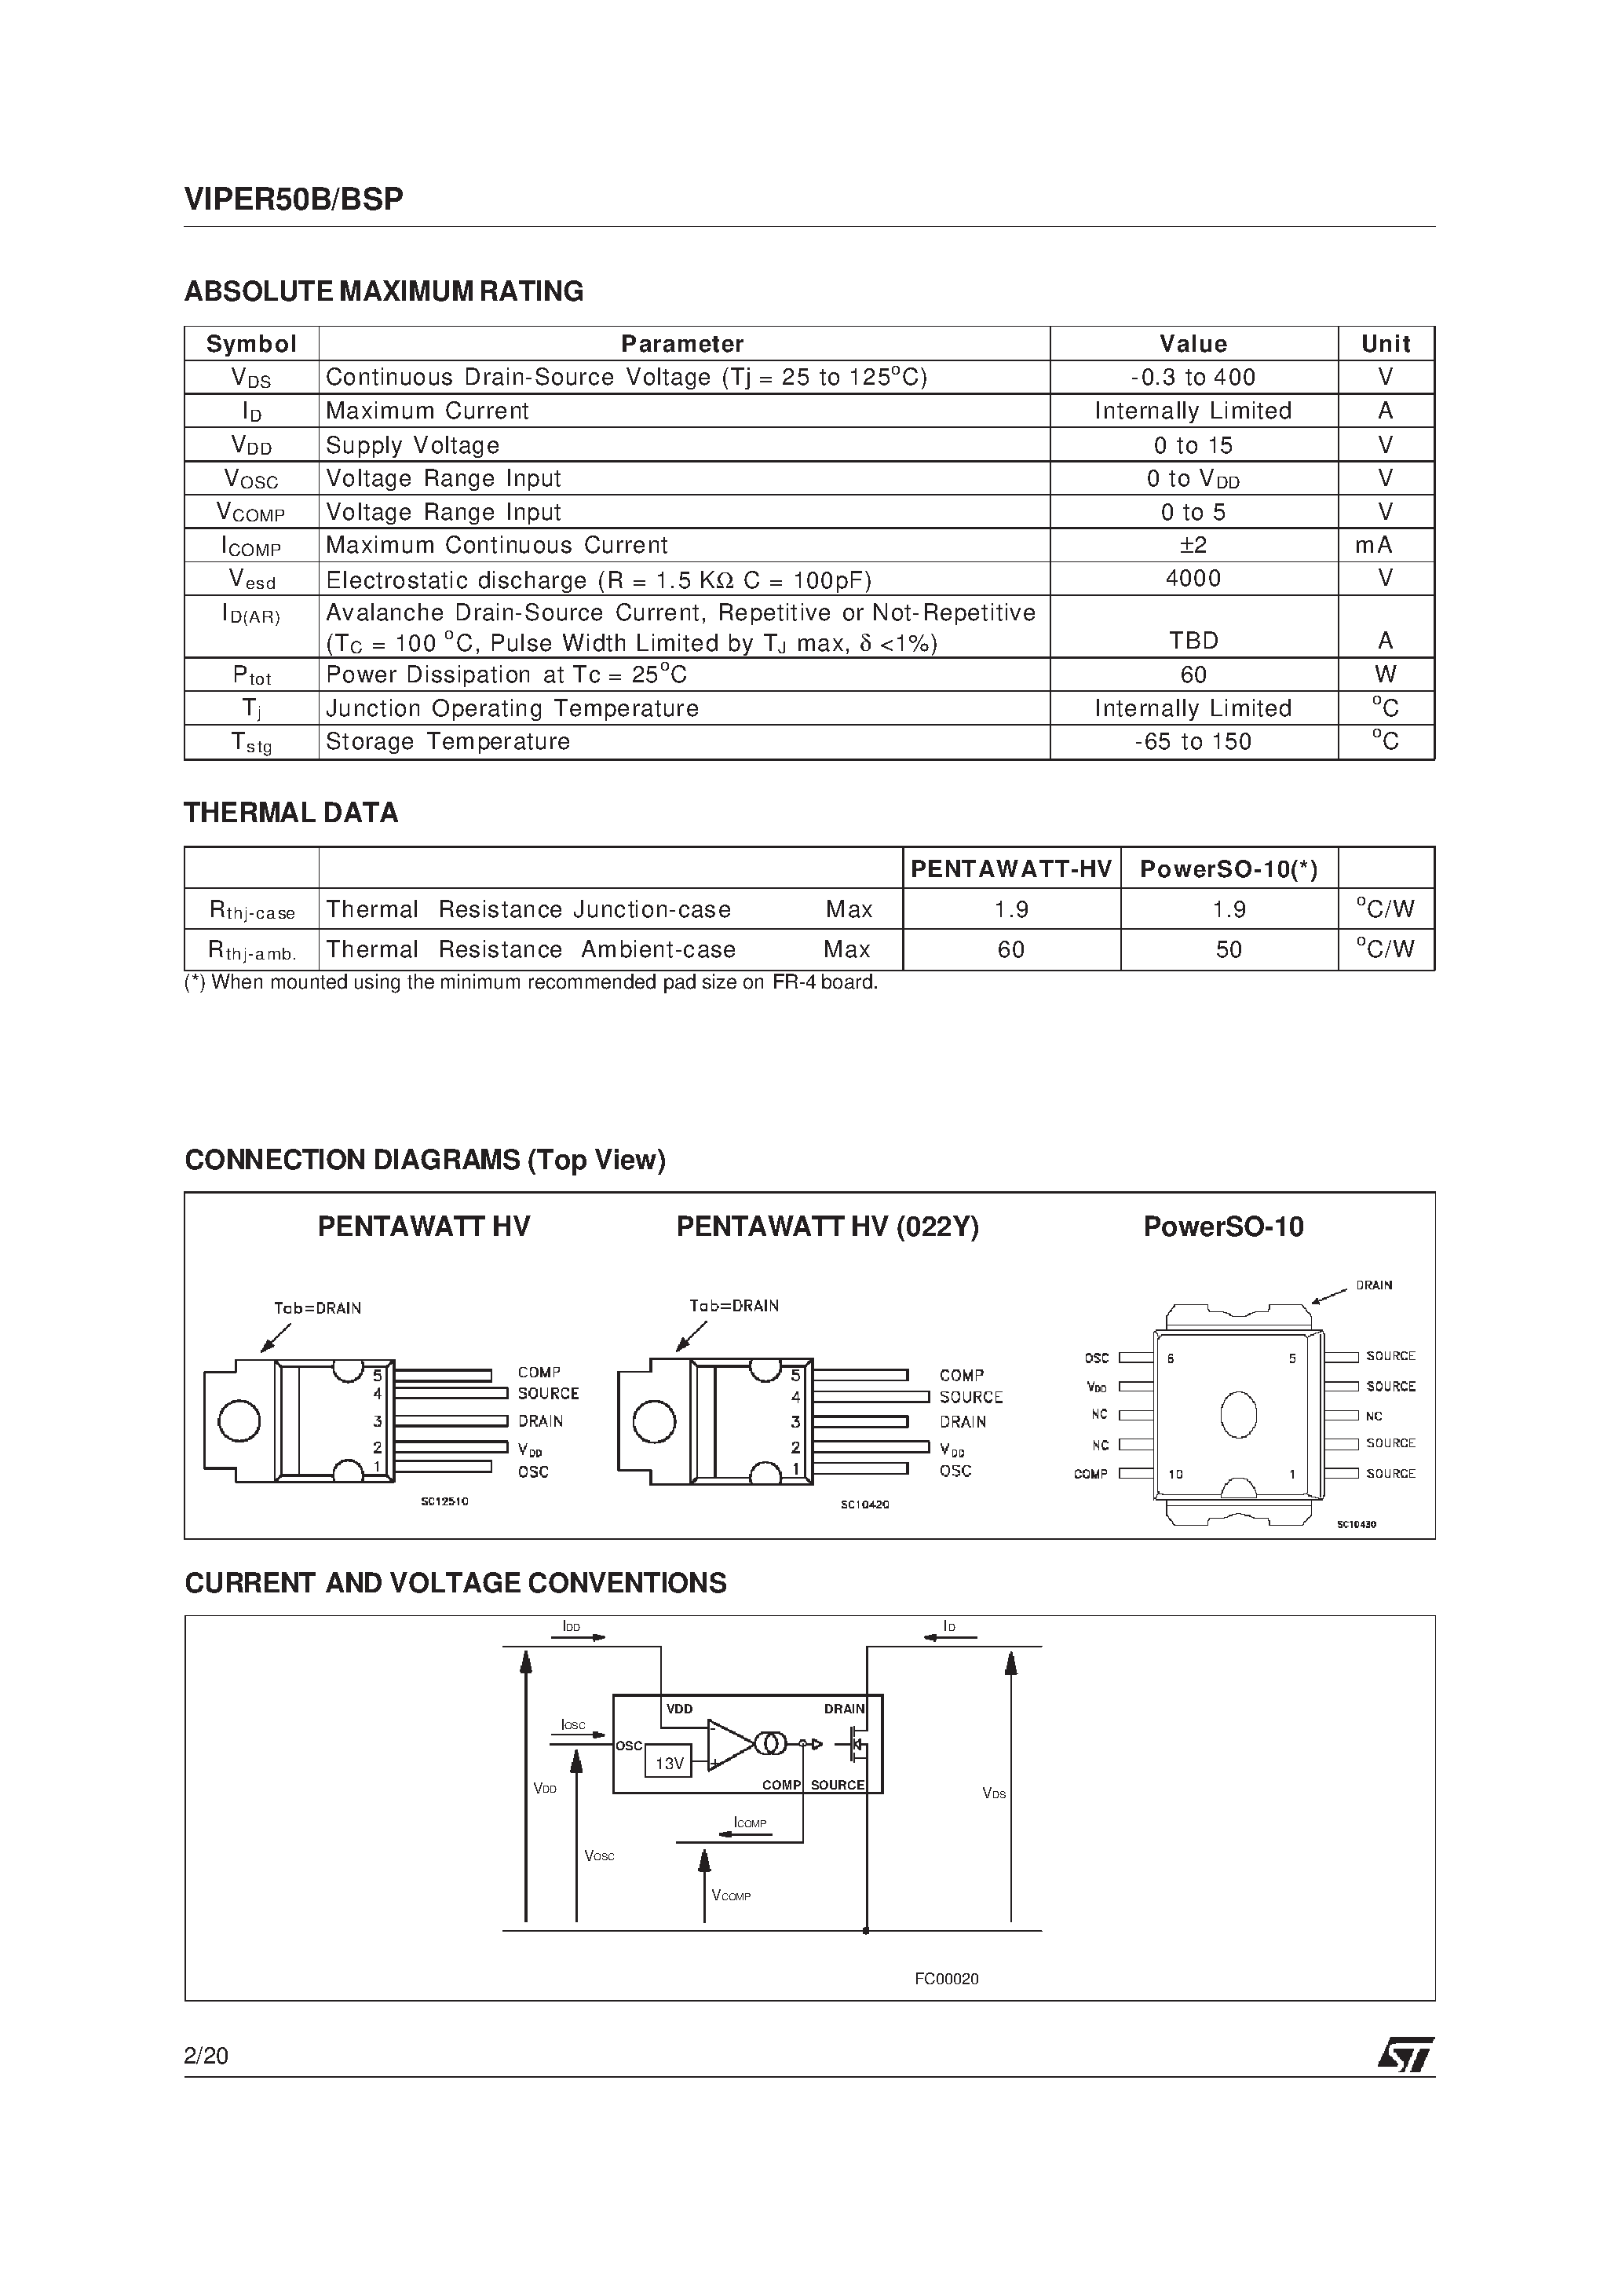 Datasheet VIPer50BSP - SMPS PRIMARY I.C. page 2